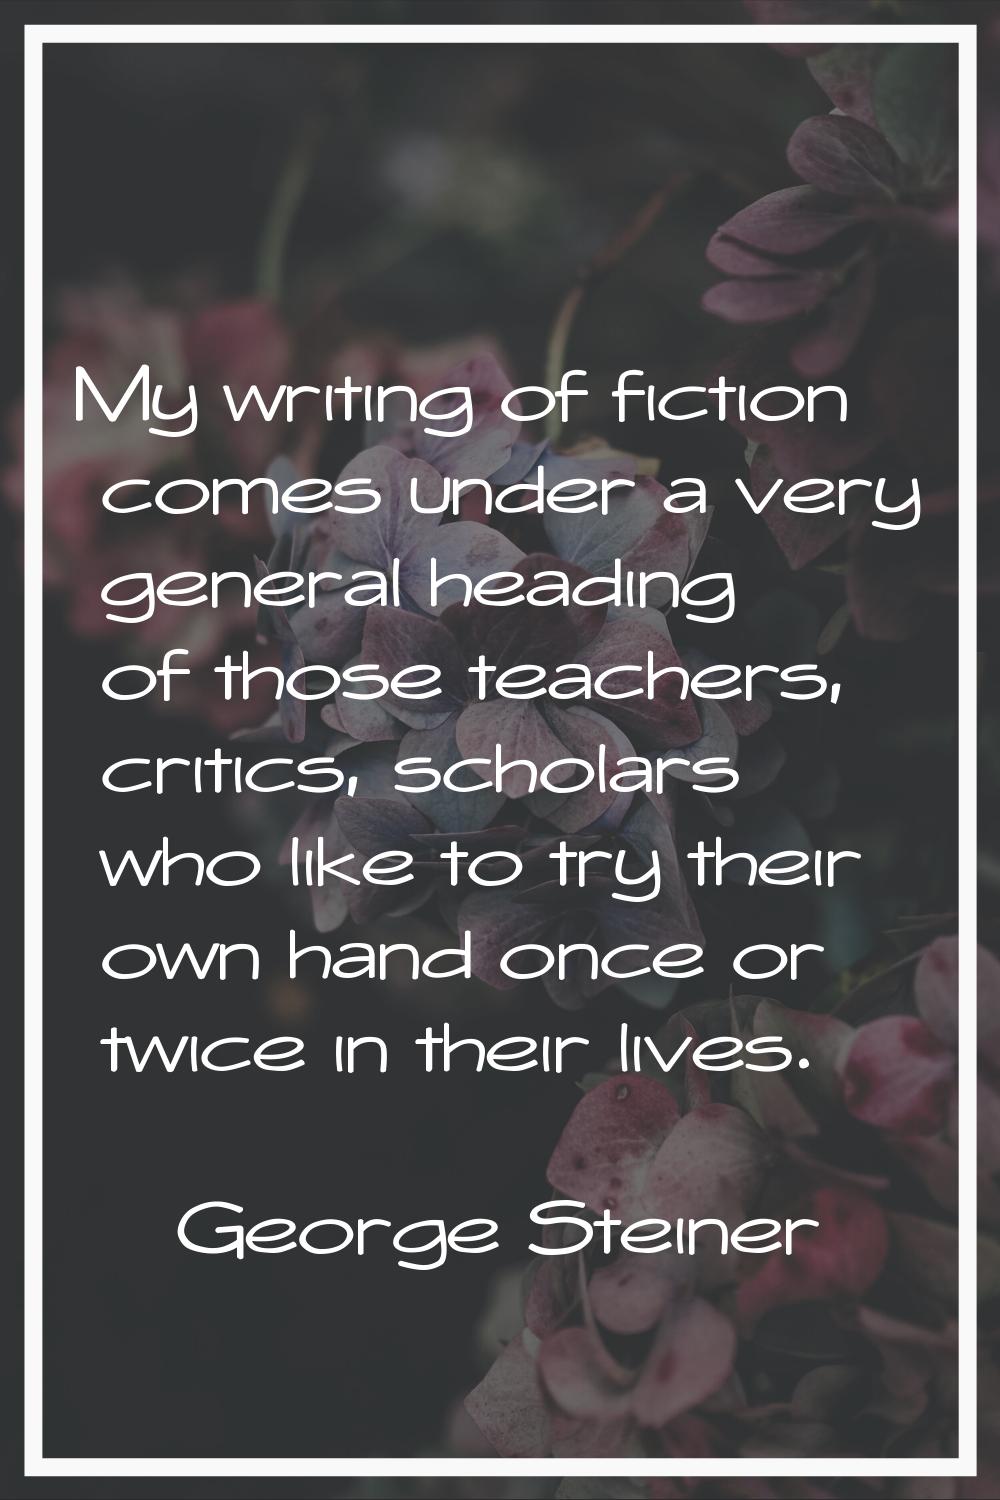 My writing of fiction comes under a very general heading of those teachers, critics, scholars who l